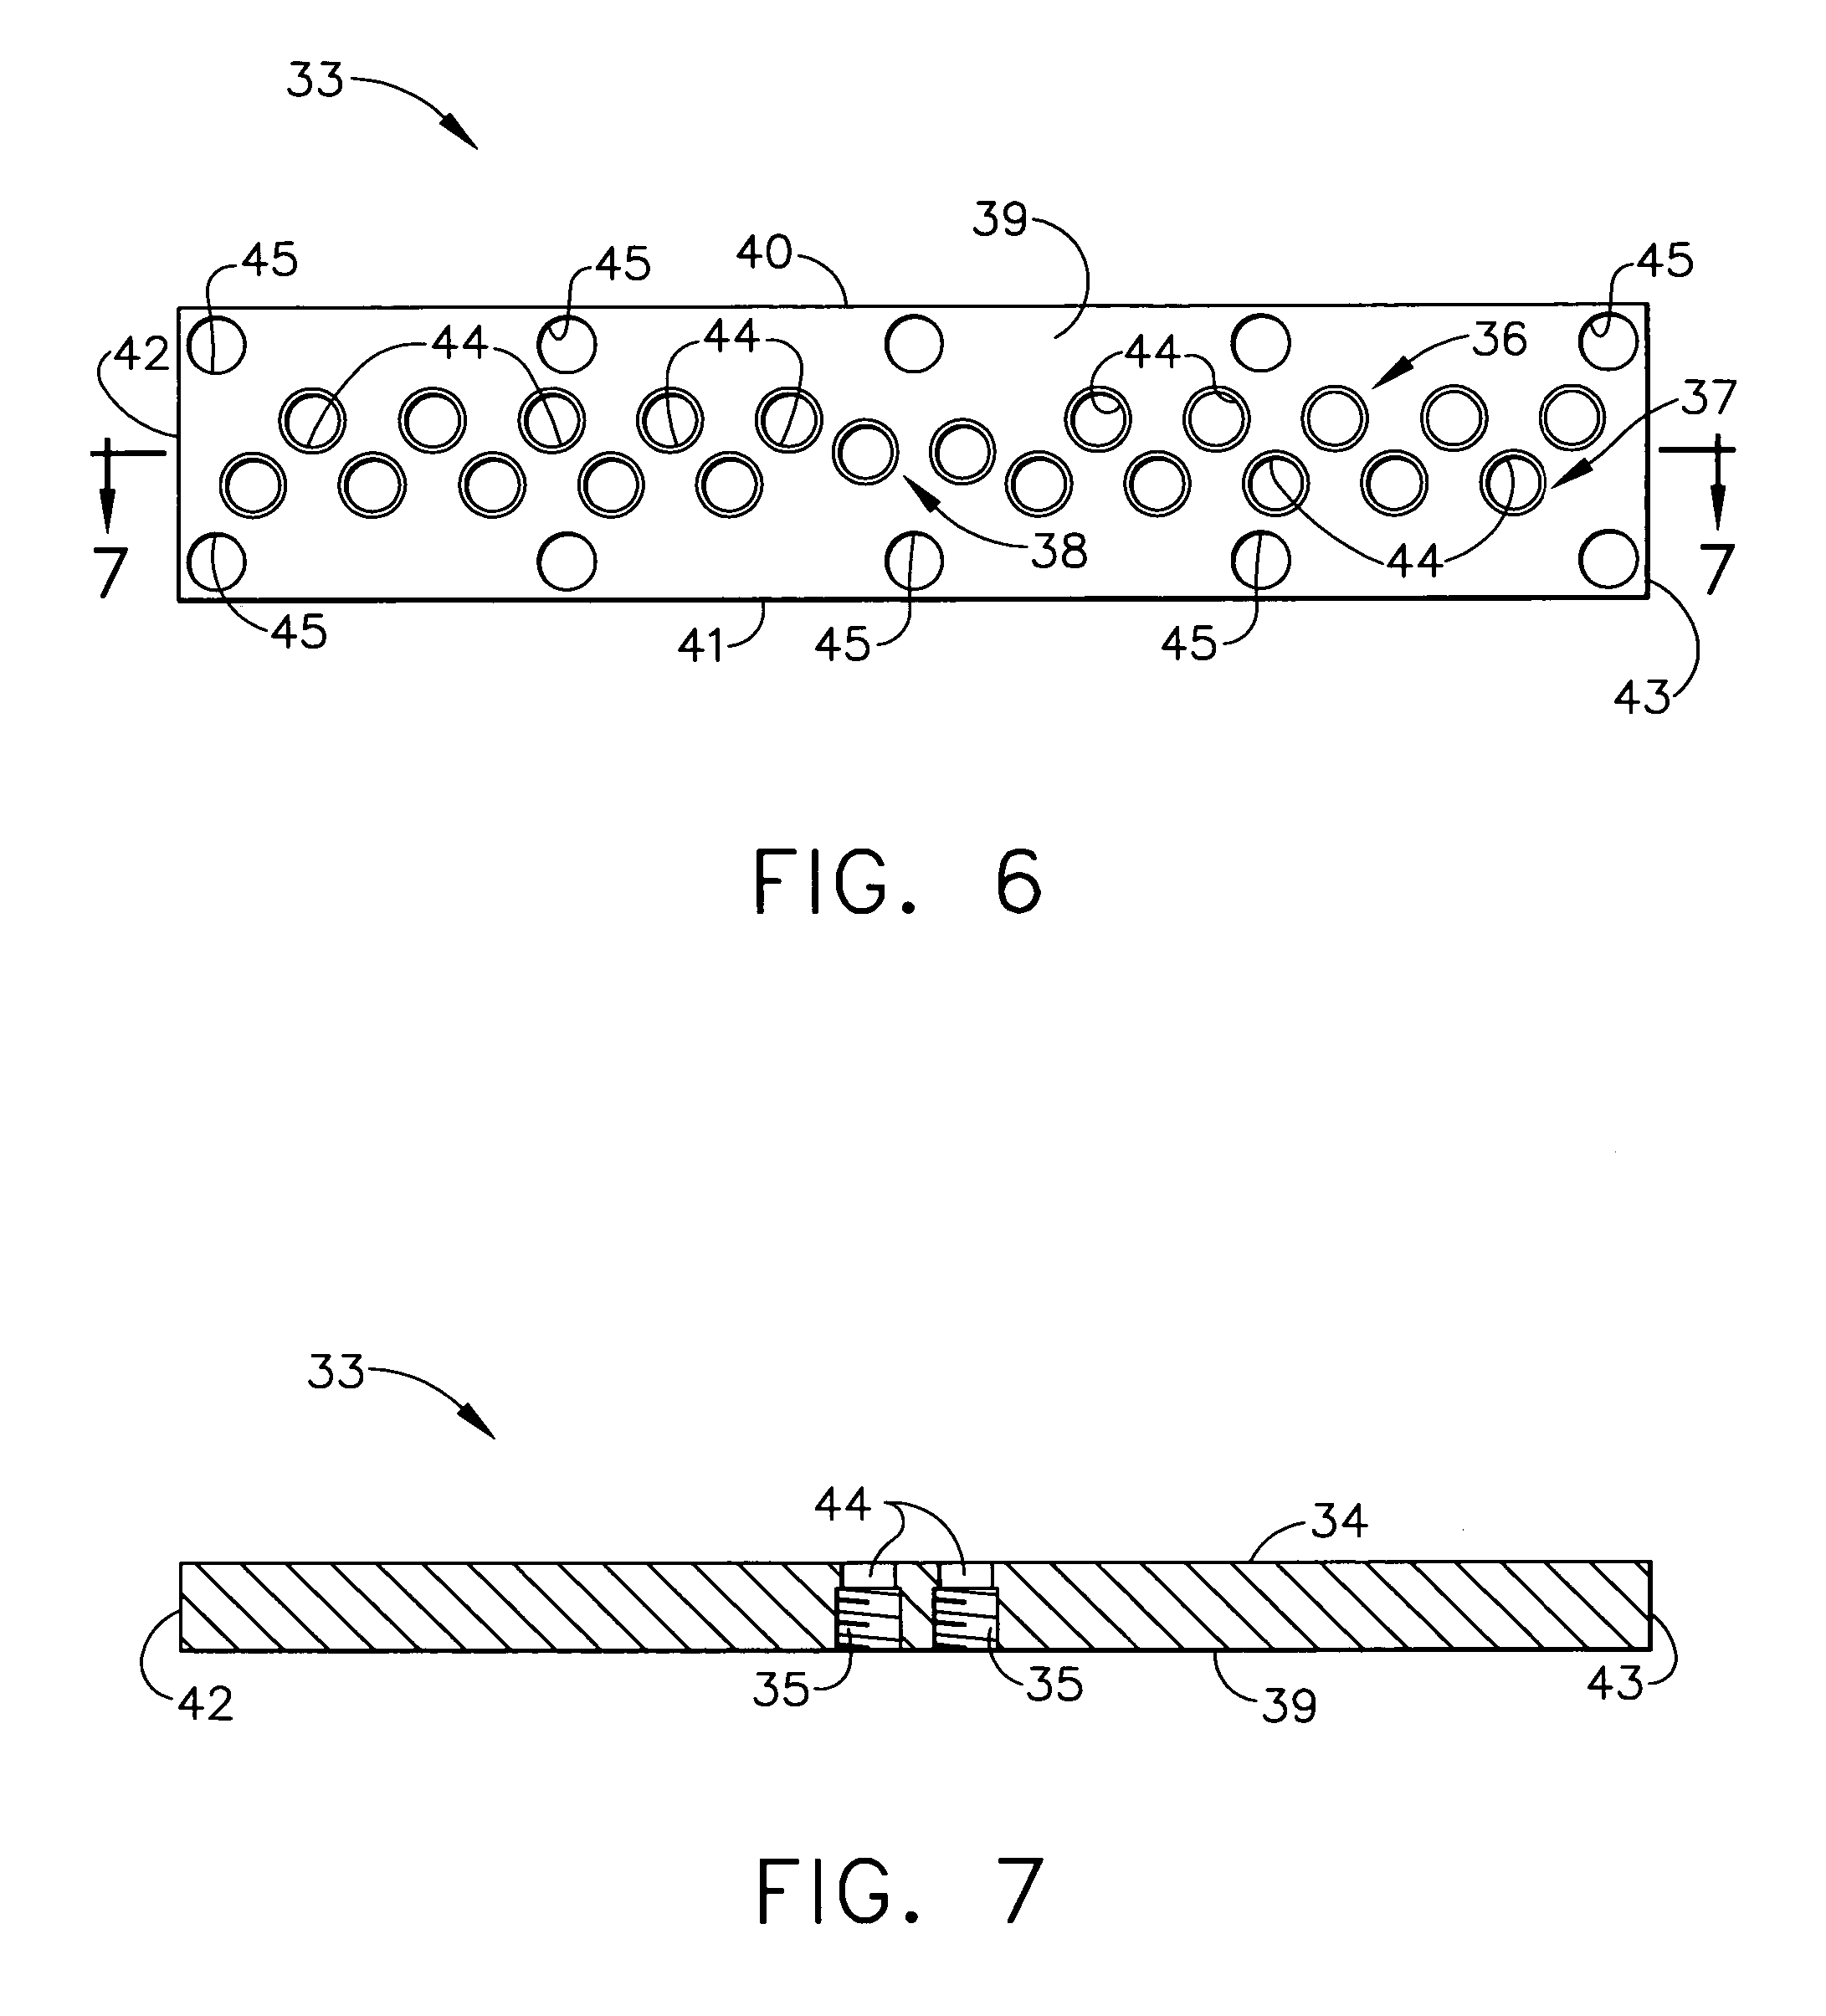 Sound damping compositions and methods for applying and baking same onto substrates